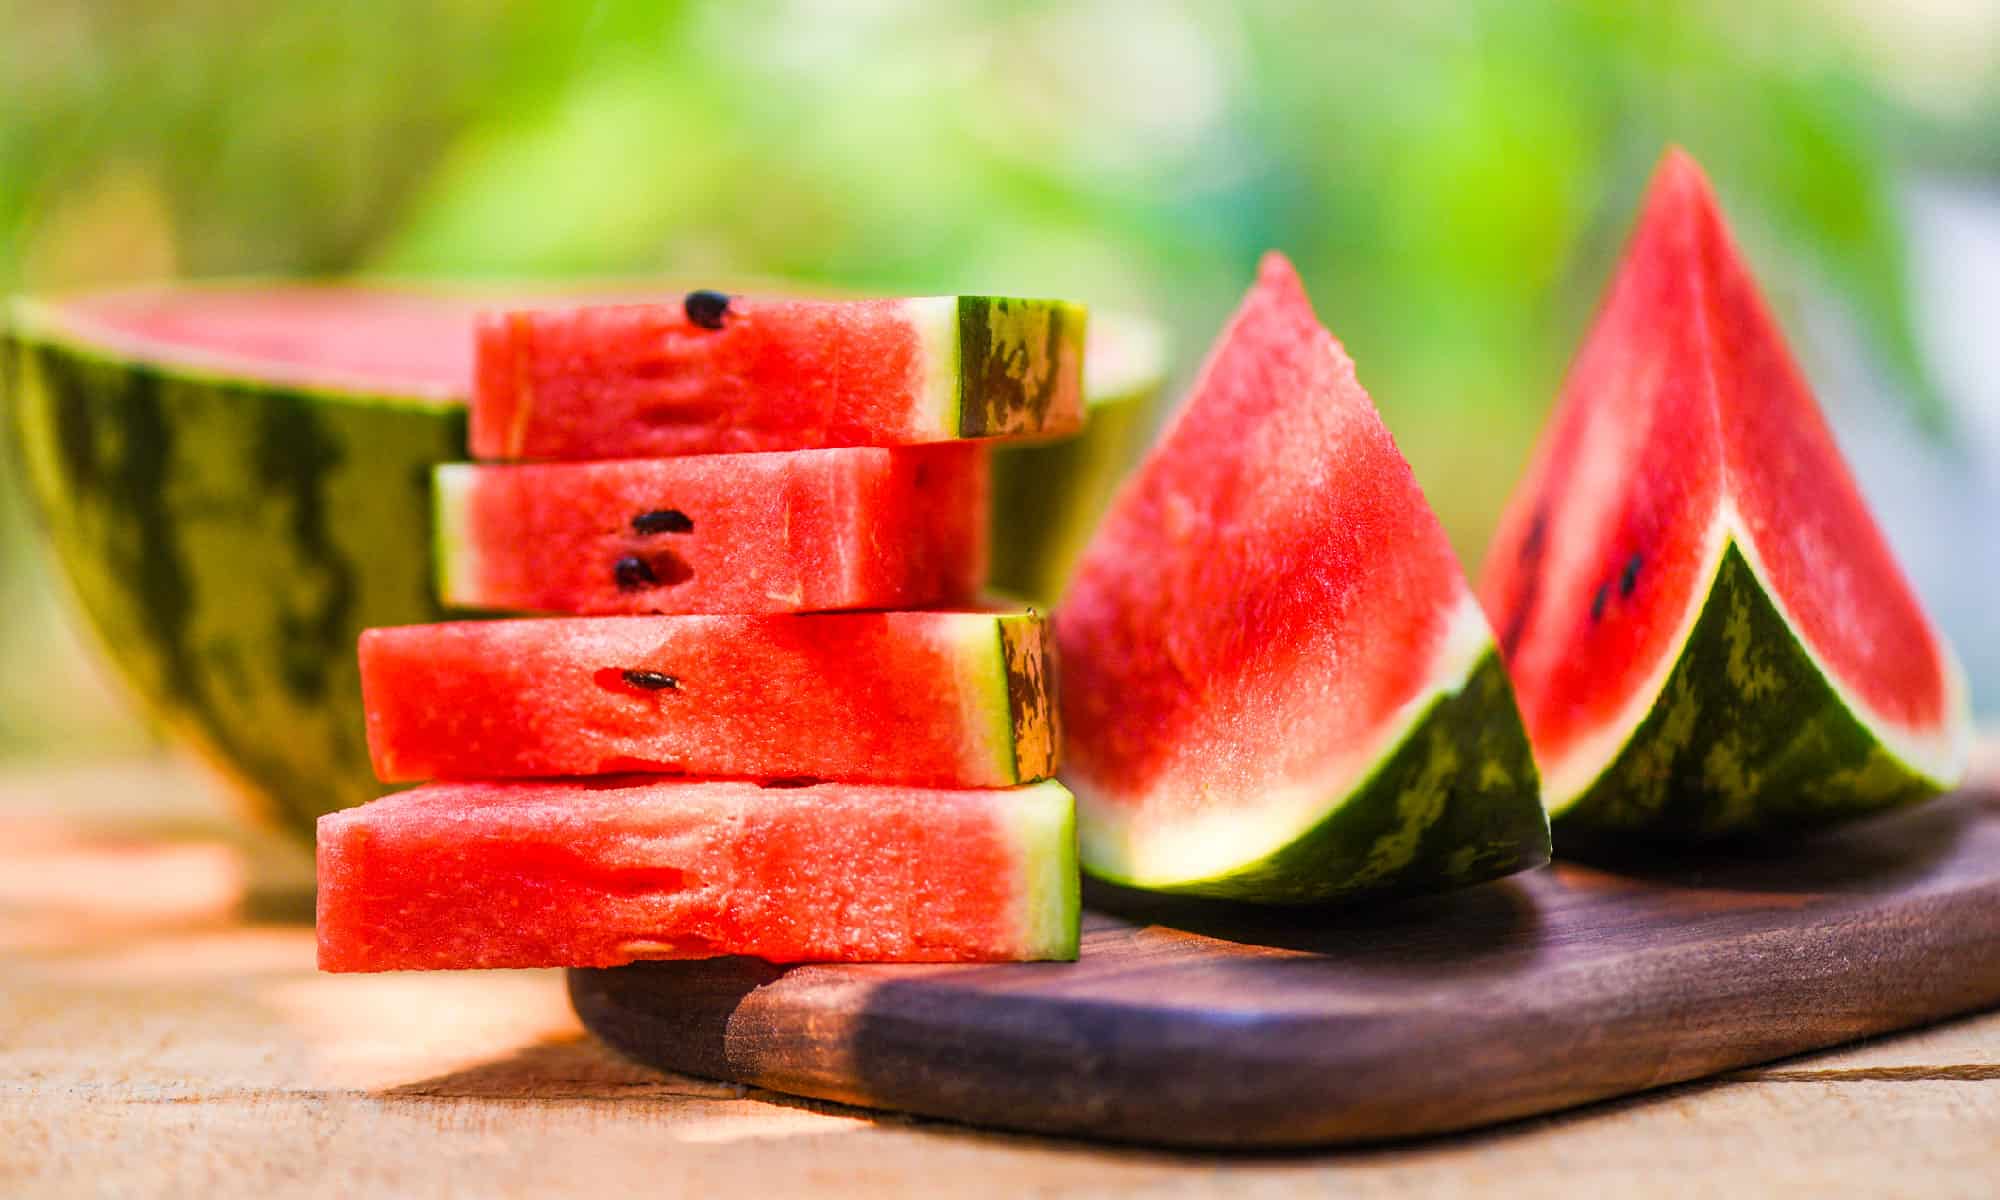 Is Watermelon A Fruit Or Vegetable? Here's Why - AZ Animals